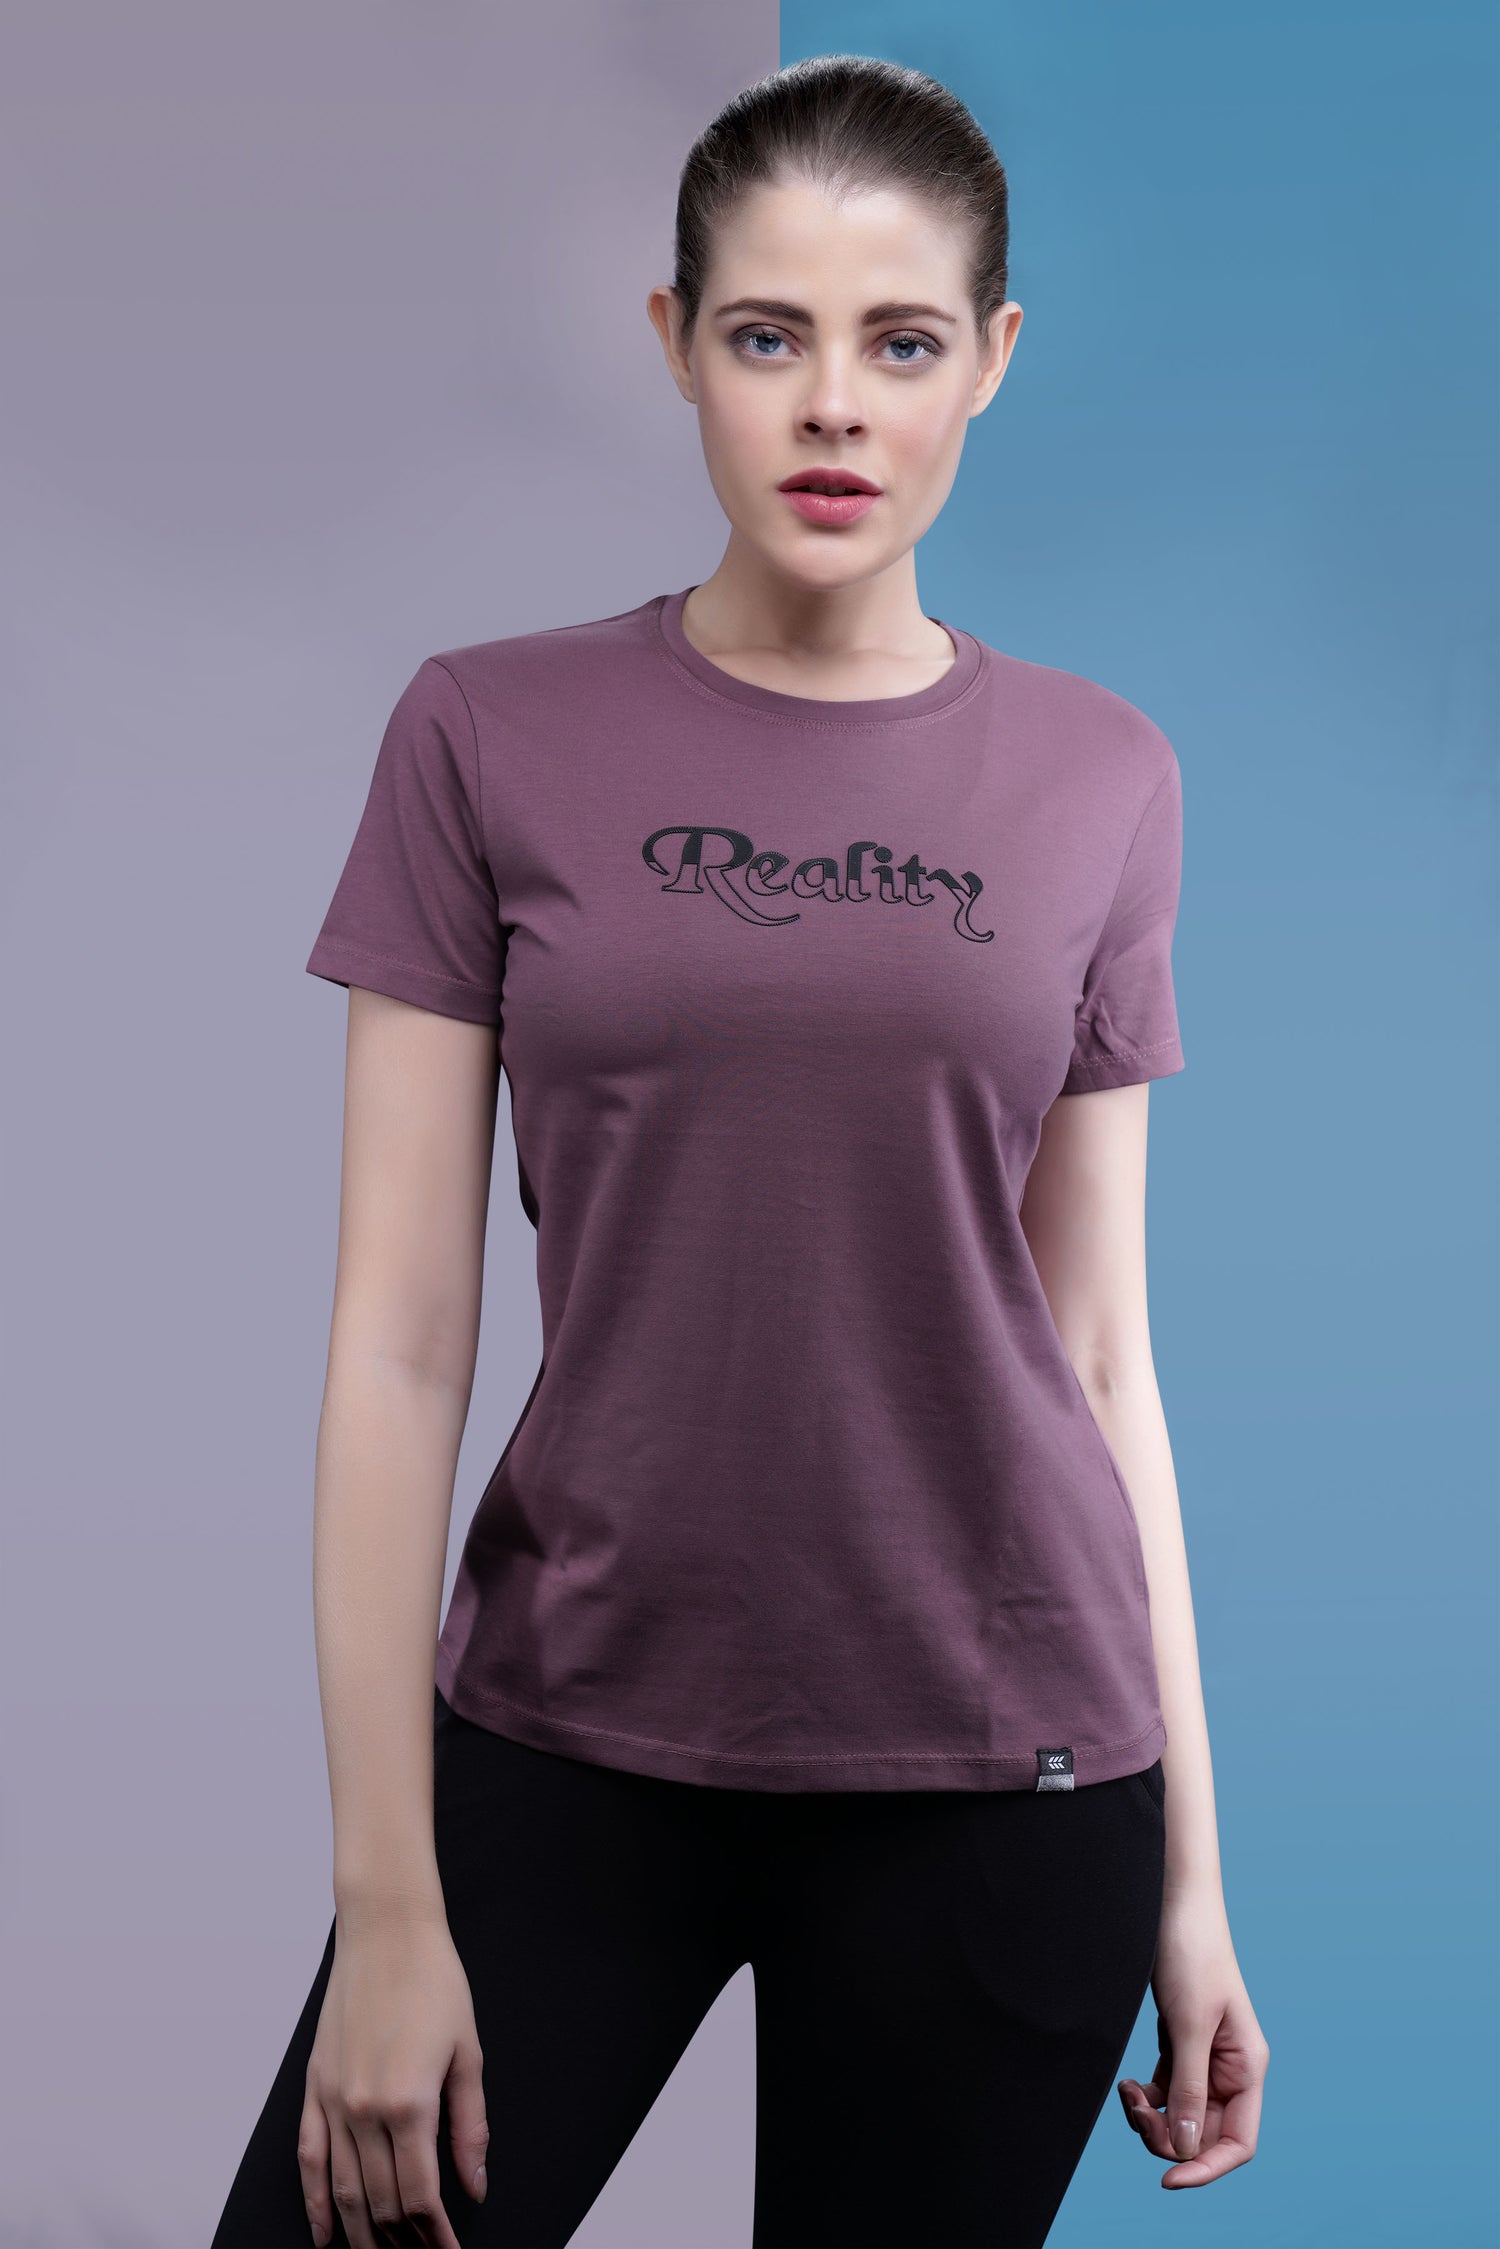 Laasa Sports - LAASA SPORTS Women's Active Wear T Shirt For more details DM  us or visit our website at www.laasasports.com #instagood #photooftheday  #fashion #instafashion #lifestyle #repost #follow #picoftheday #fitness  #outfit #instapick #